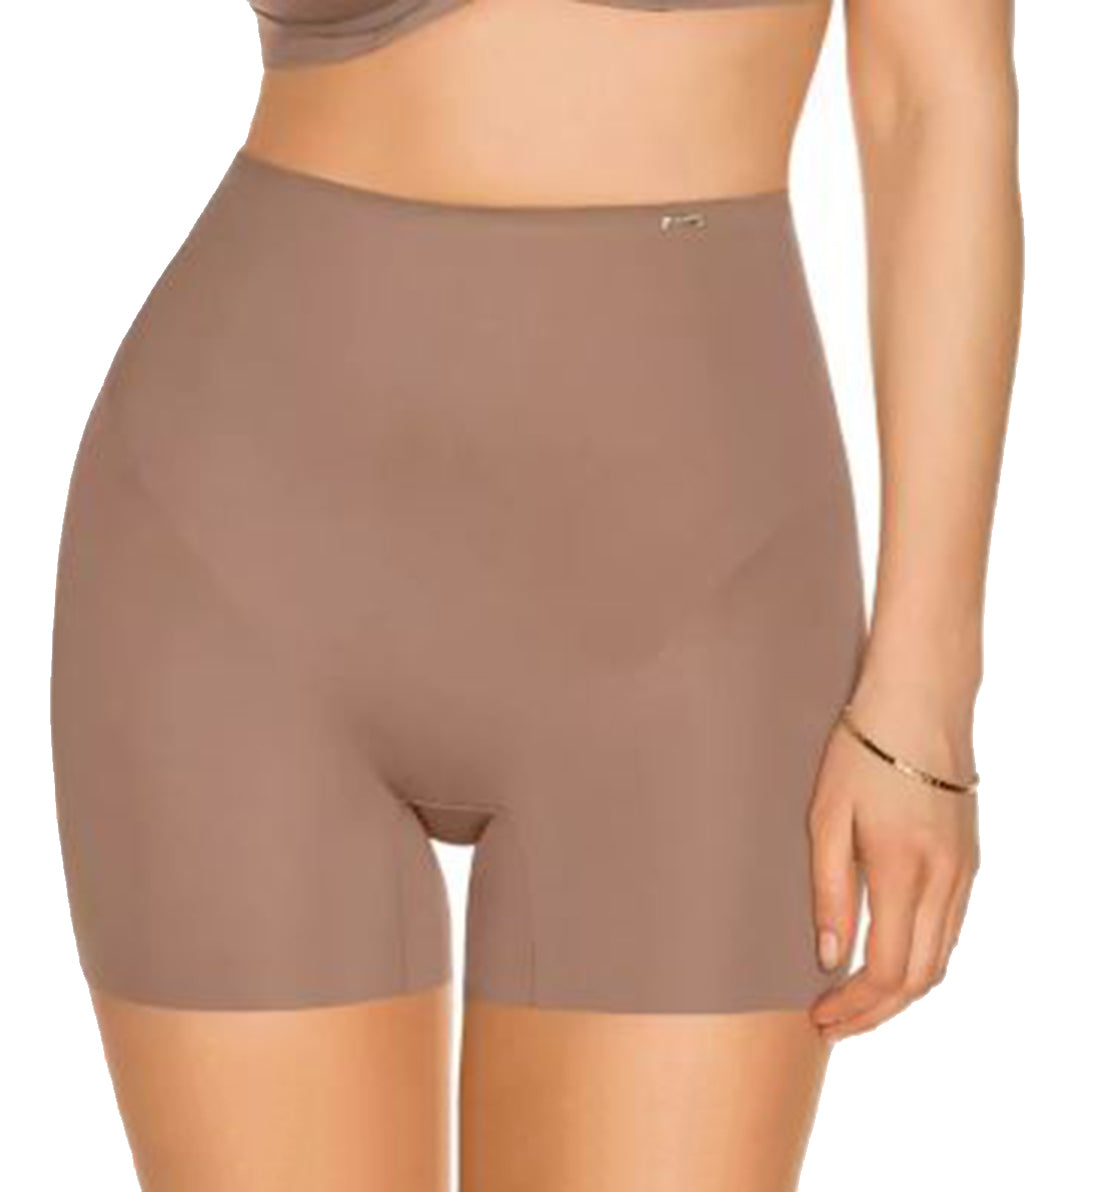 Leonisa Undetectable Padded Booty Lifter Shaper Short (012889)- Natural